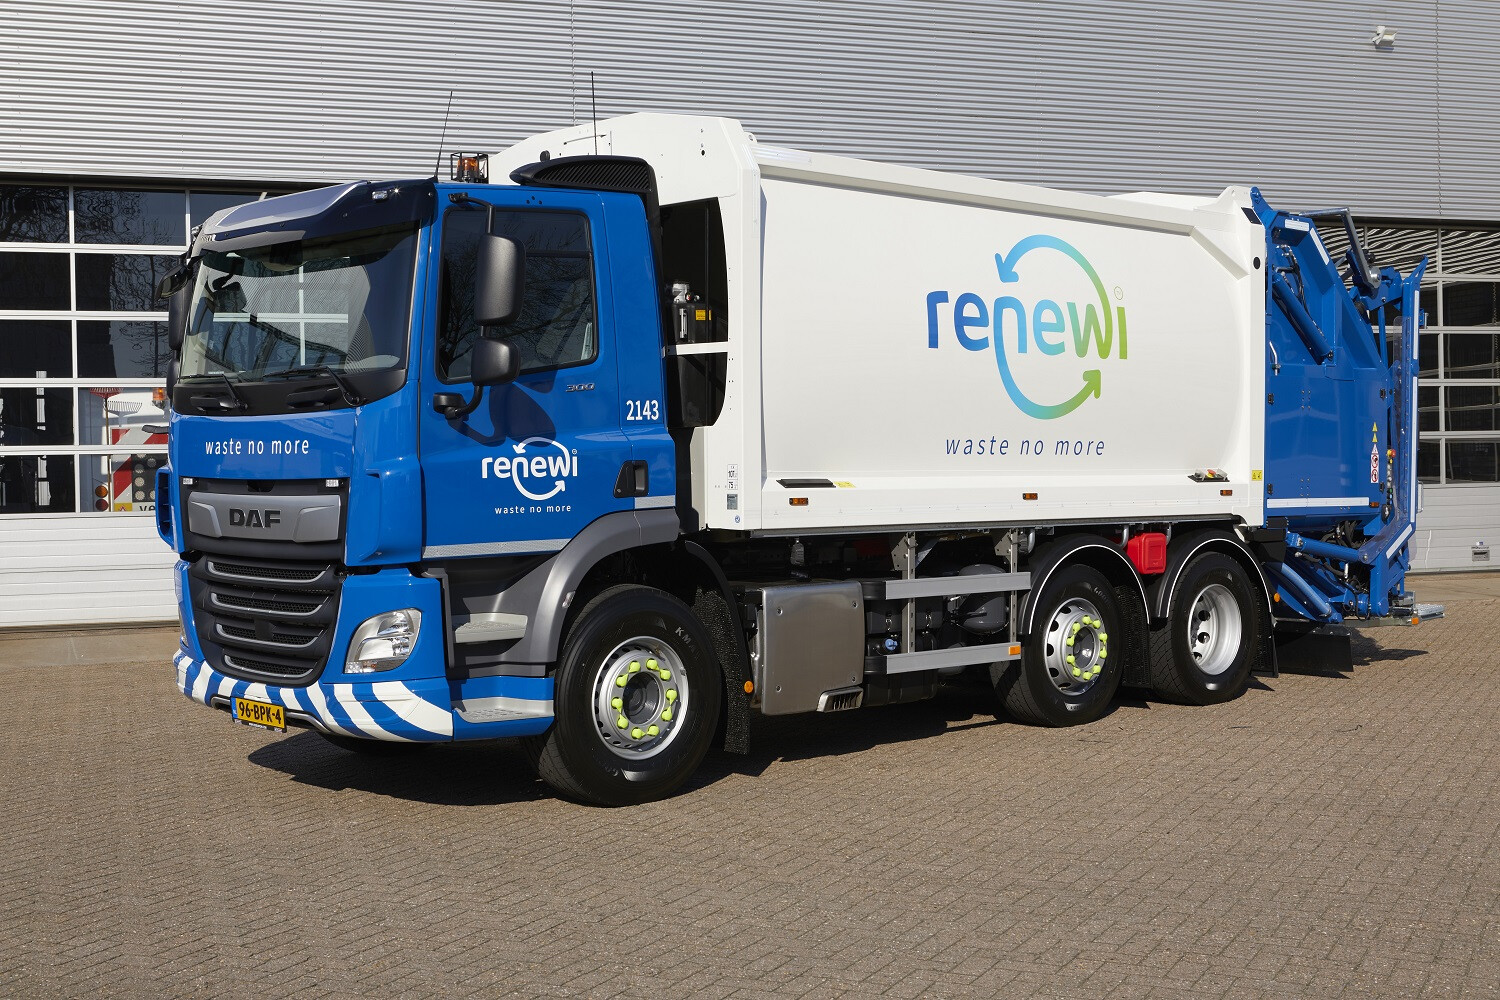 01-Waste-recycler-Renewi-orders-another-200-trucks-from-DAF